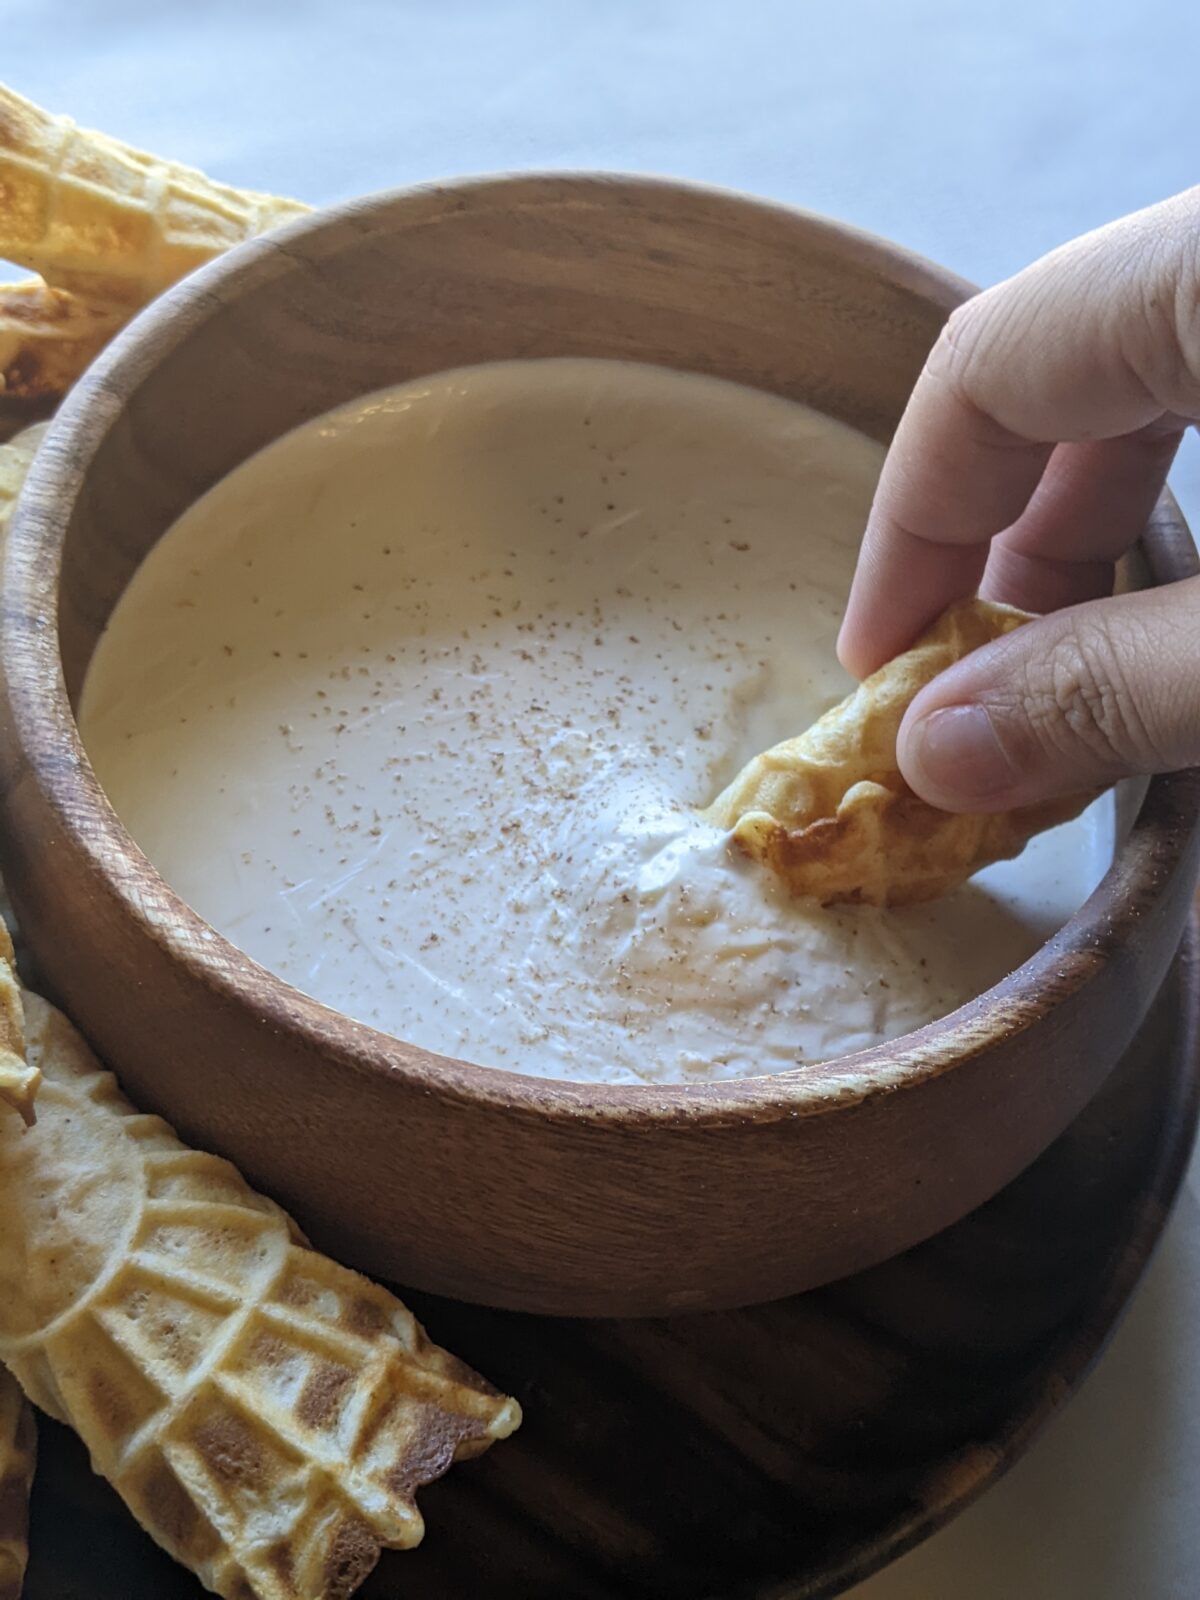 the author's hand dips a waffle-like biscuit into a bowl of sack cream